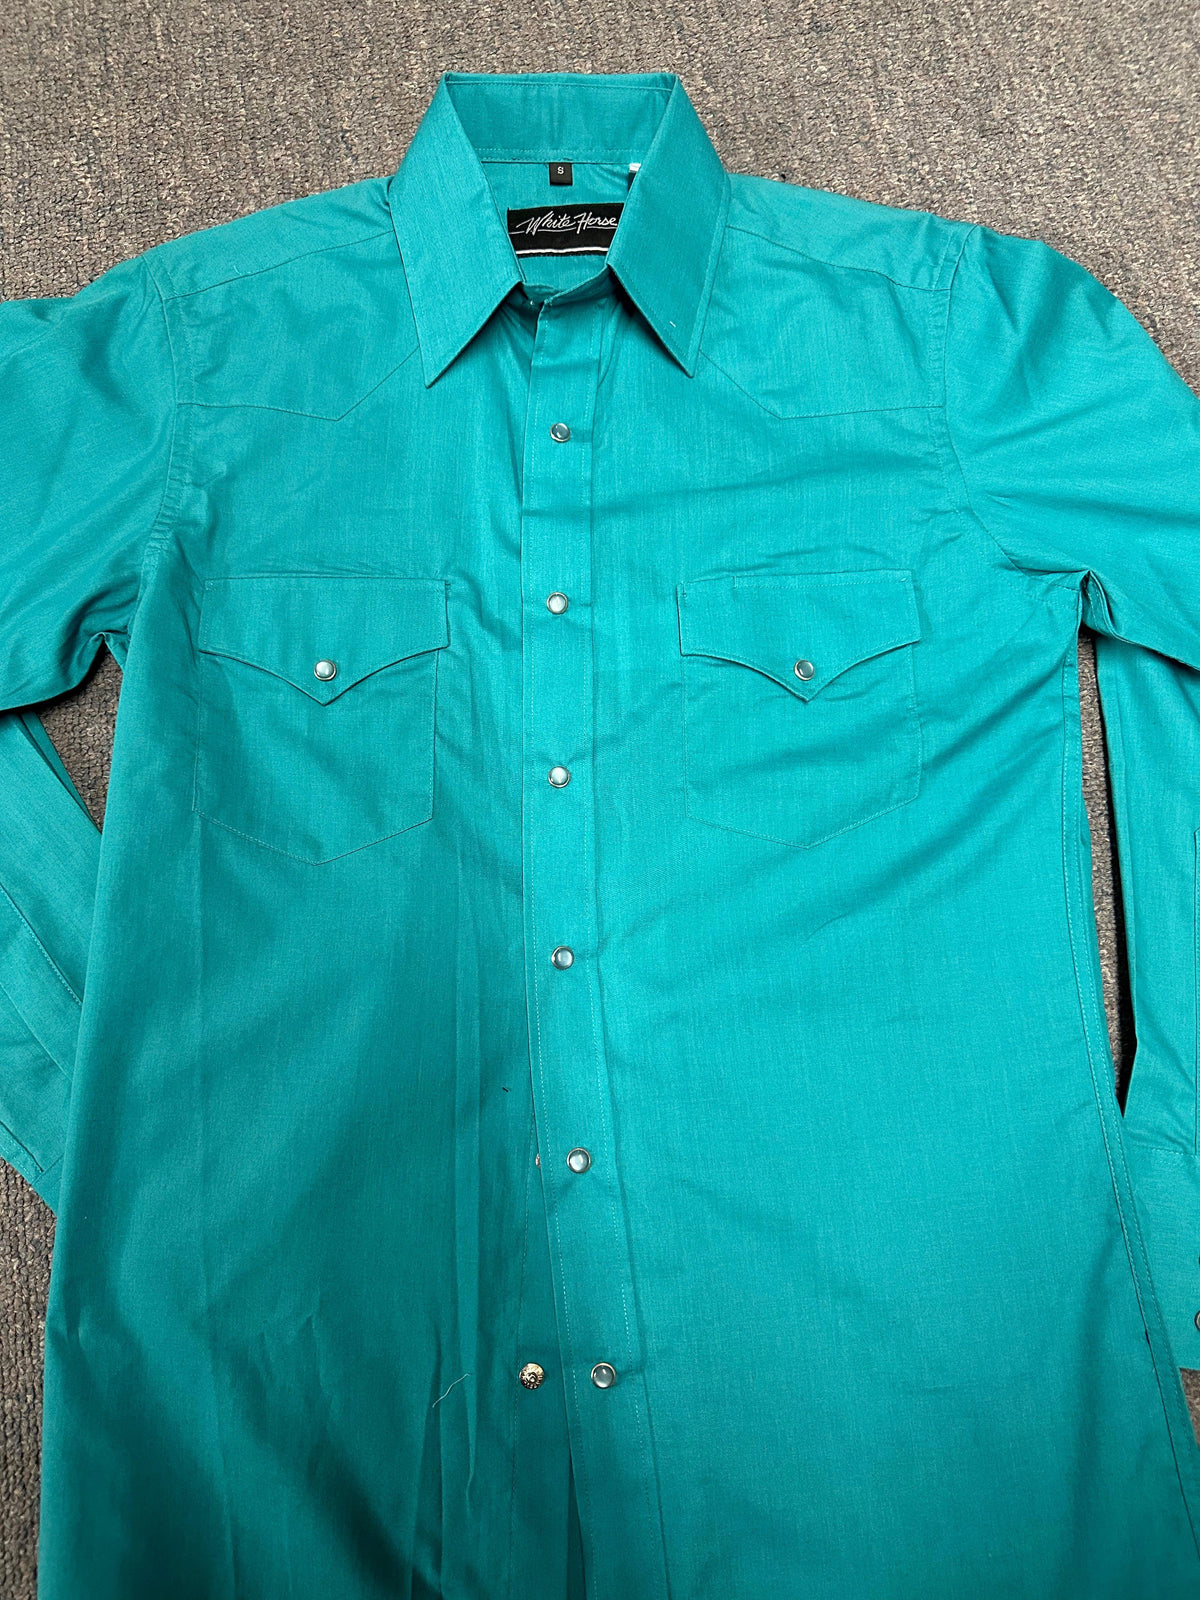 A men&#39;s WHITEHORSE brand western shirt in turquoise on the floor.